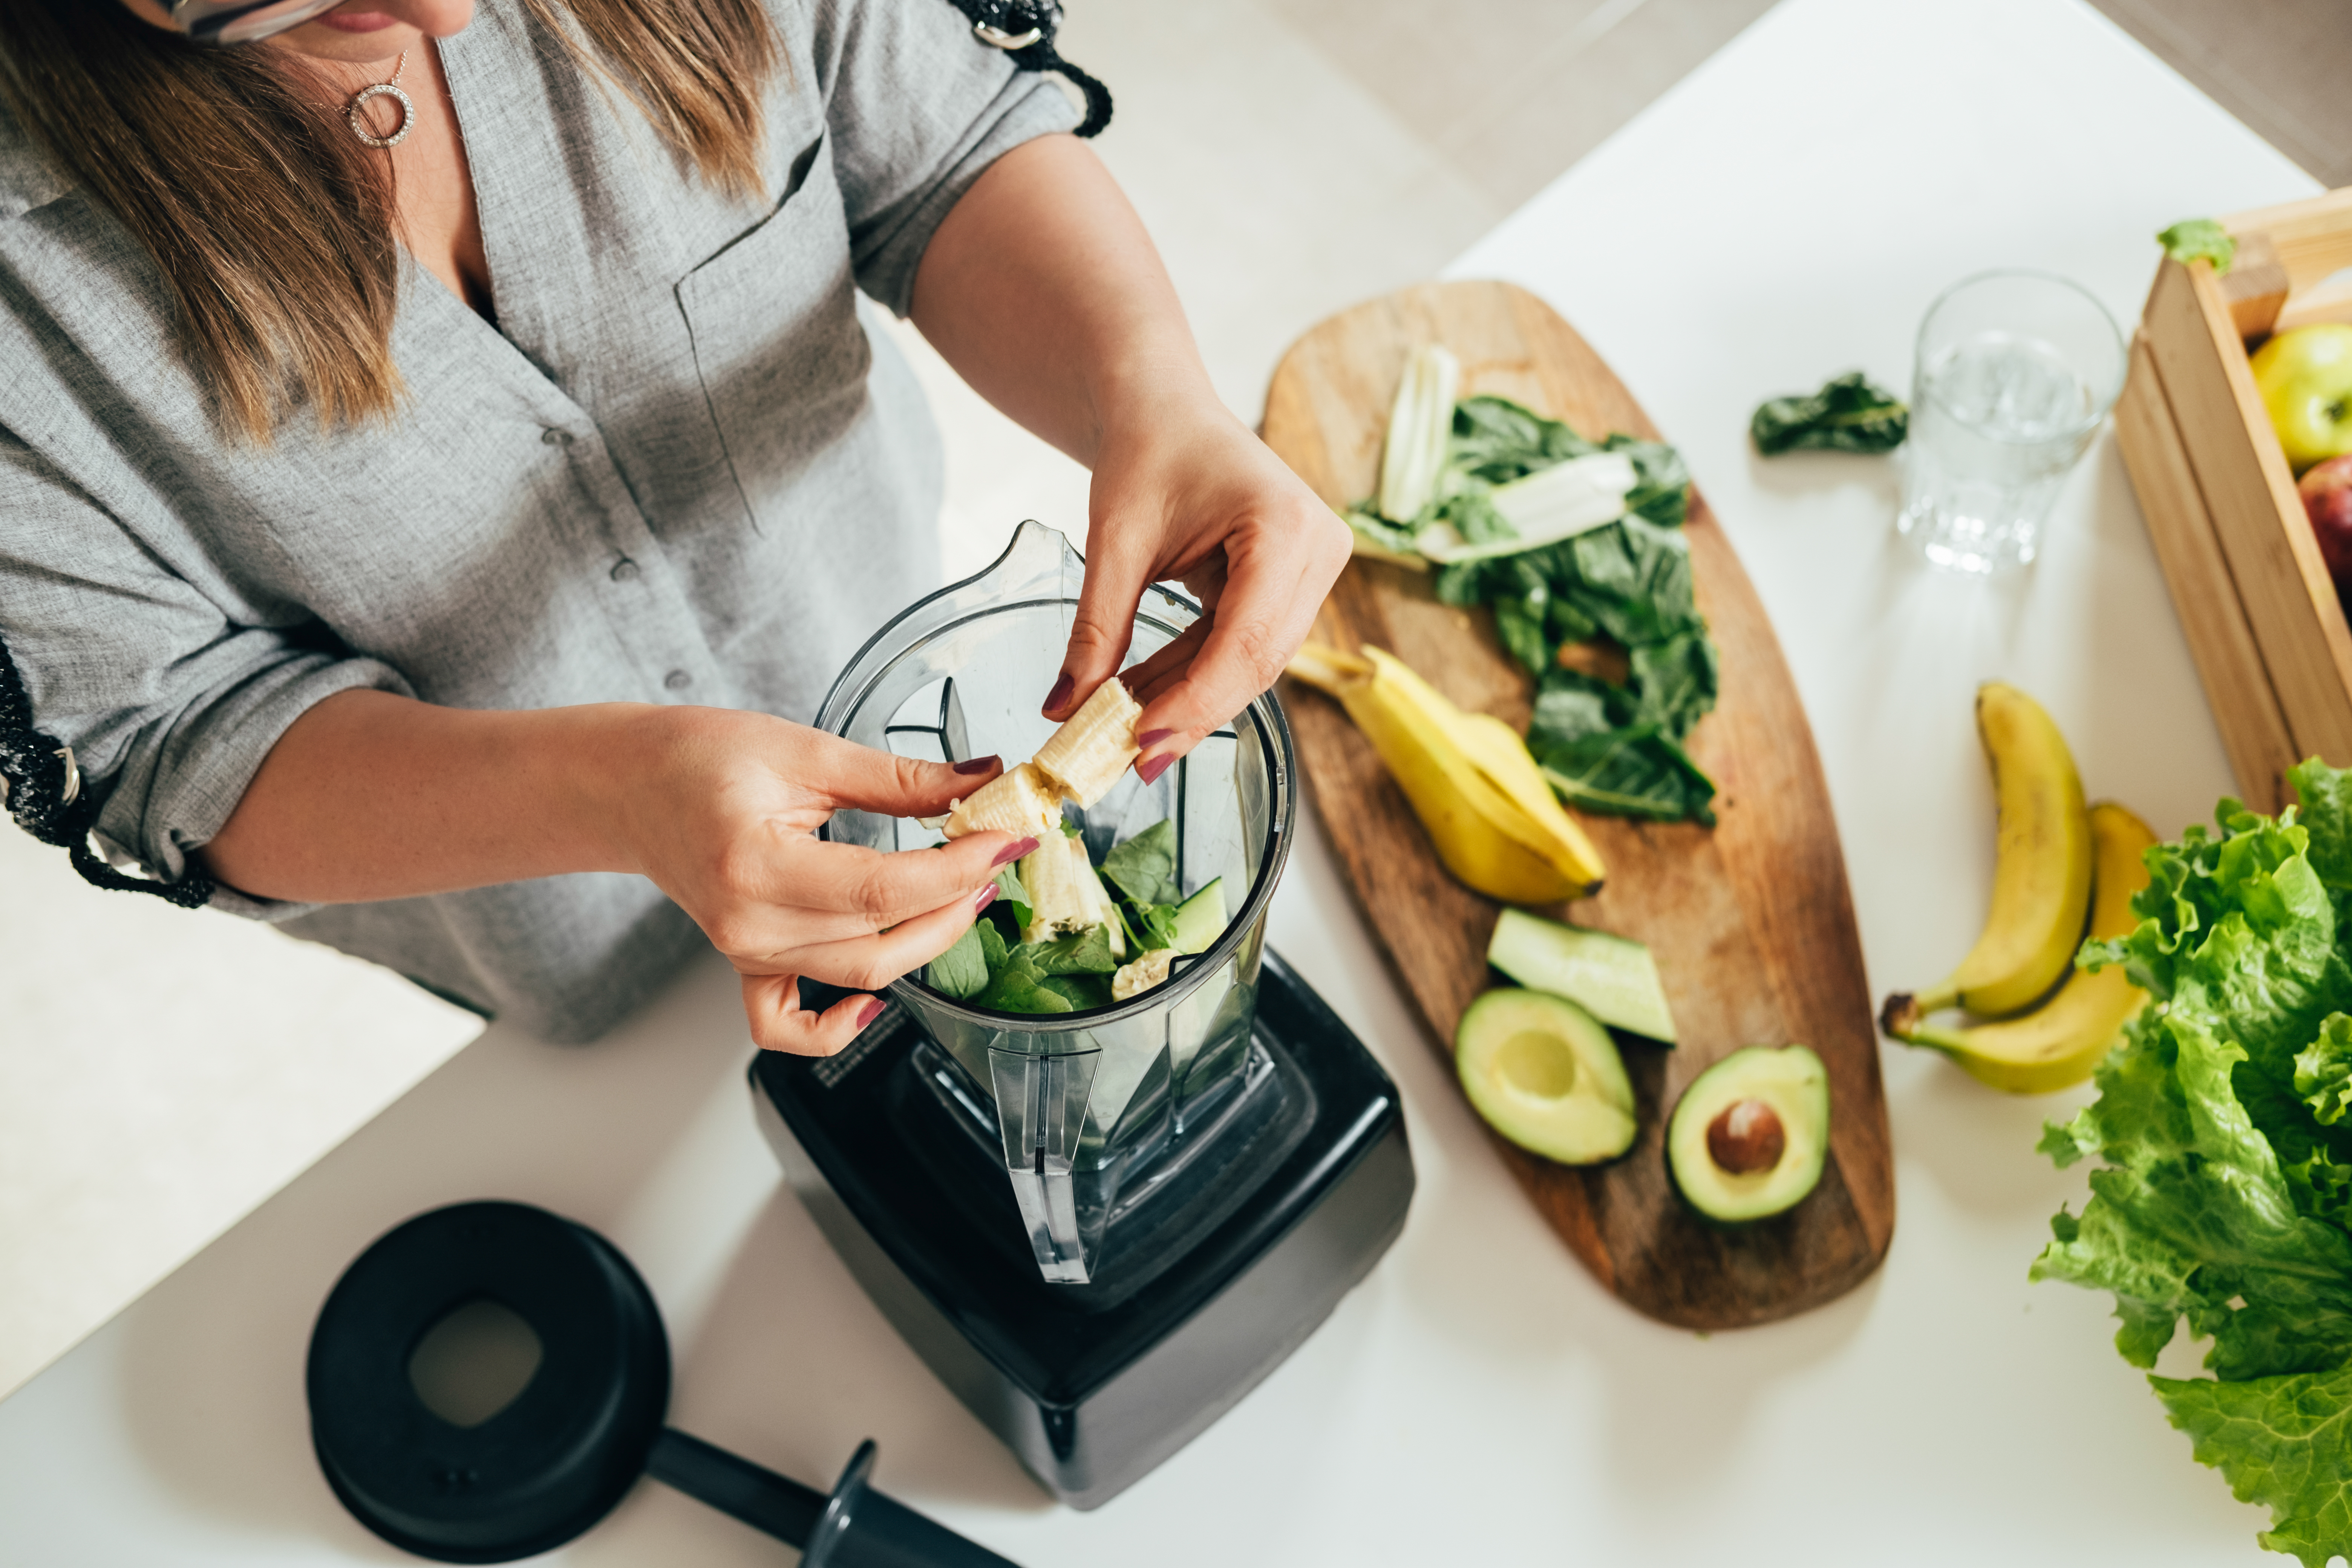 8 kitchen tools to make meal prep easier - TODAY